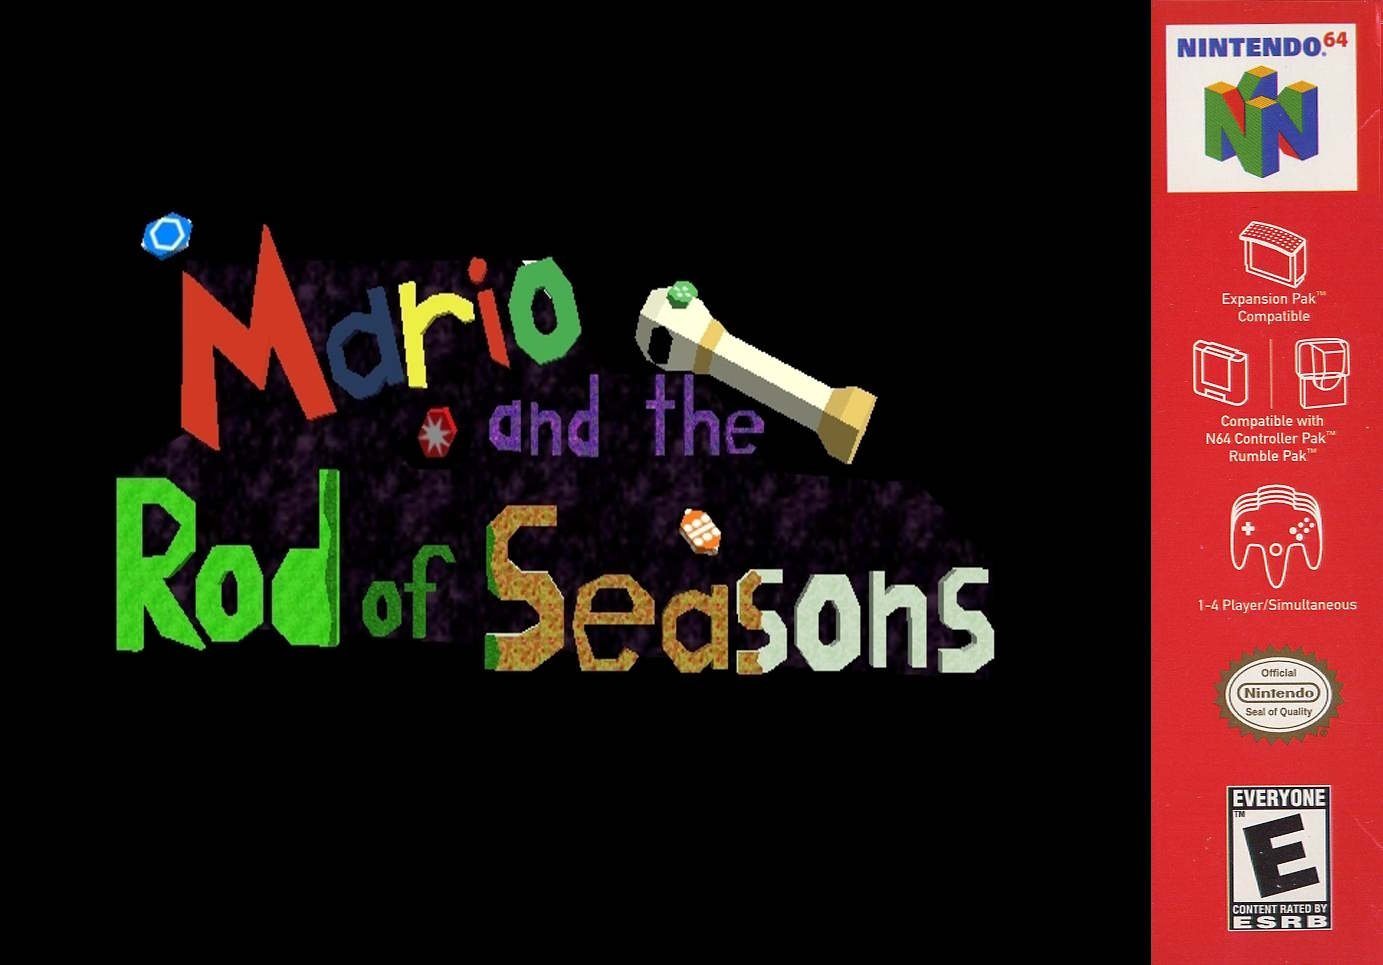 Mario and The Rod of Seasons